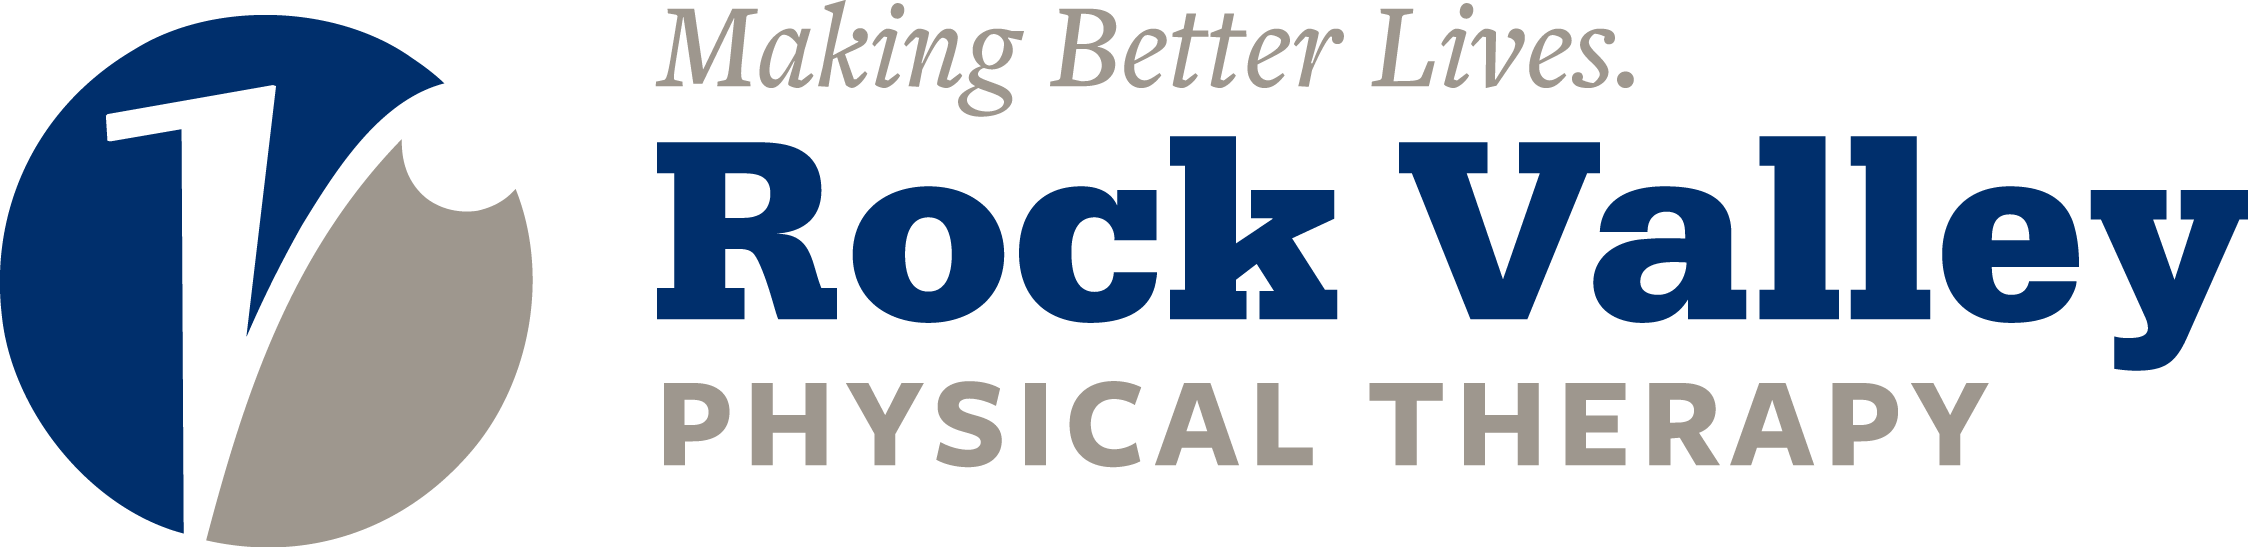 Rock Valley Physical Therapy logo